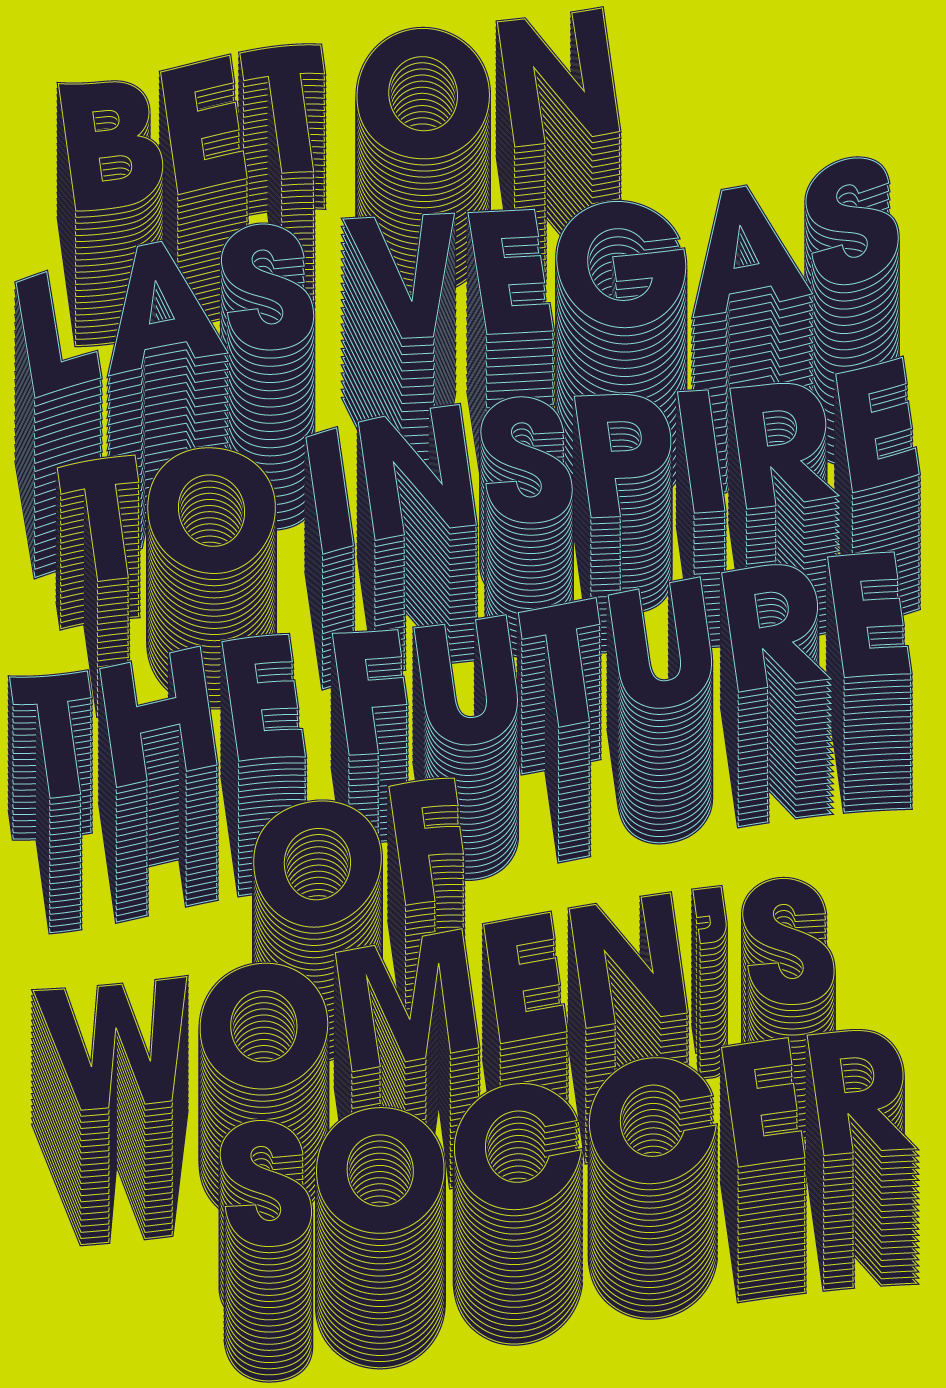 Bet on Las Vegas to inspire the future of women's soccer.